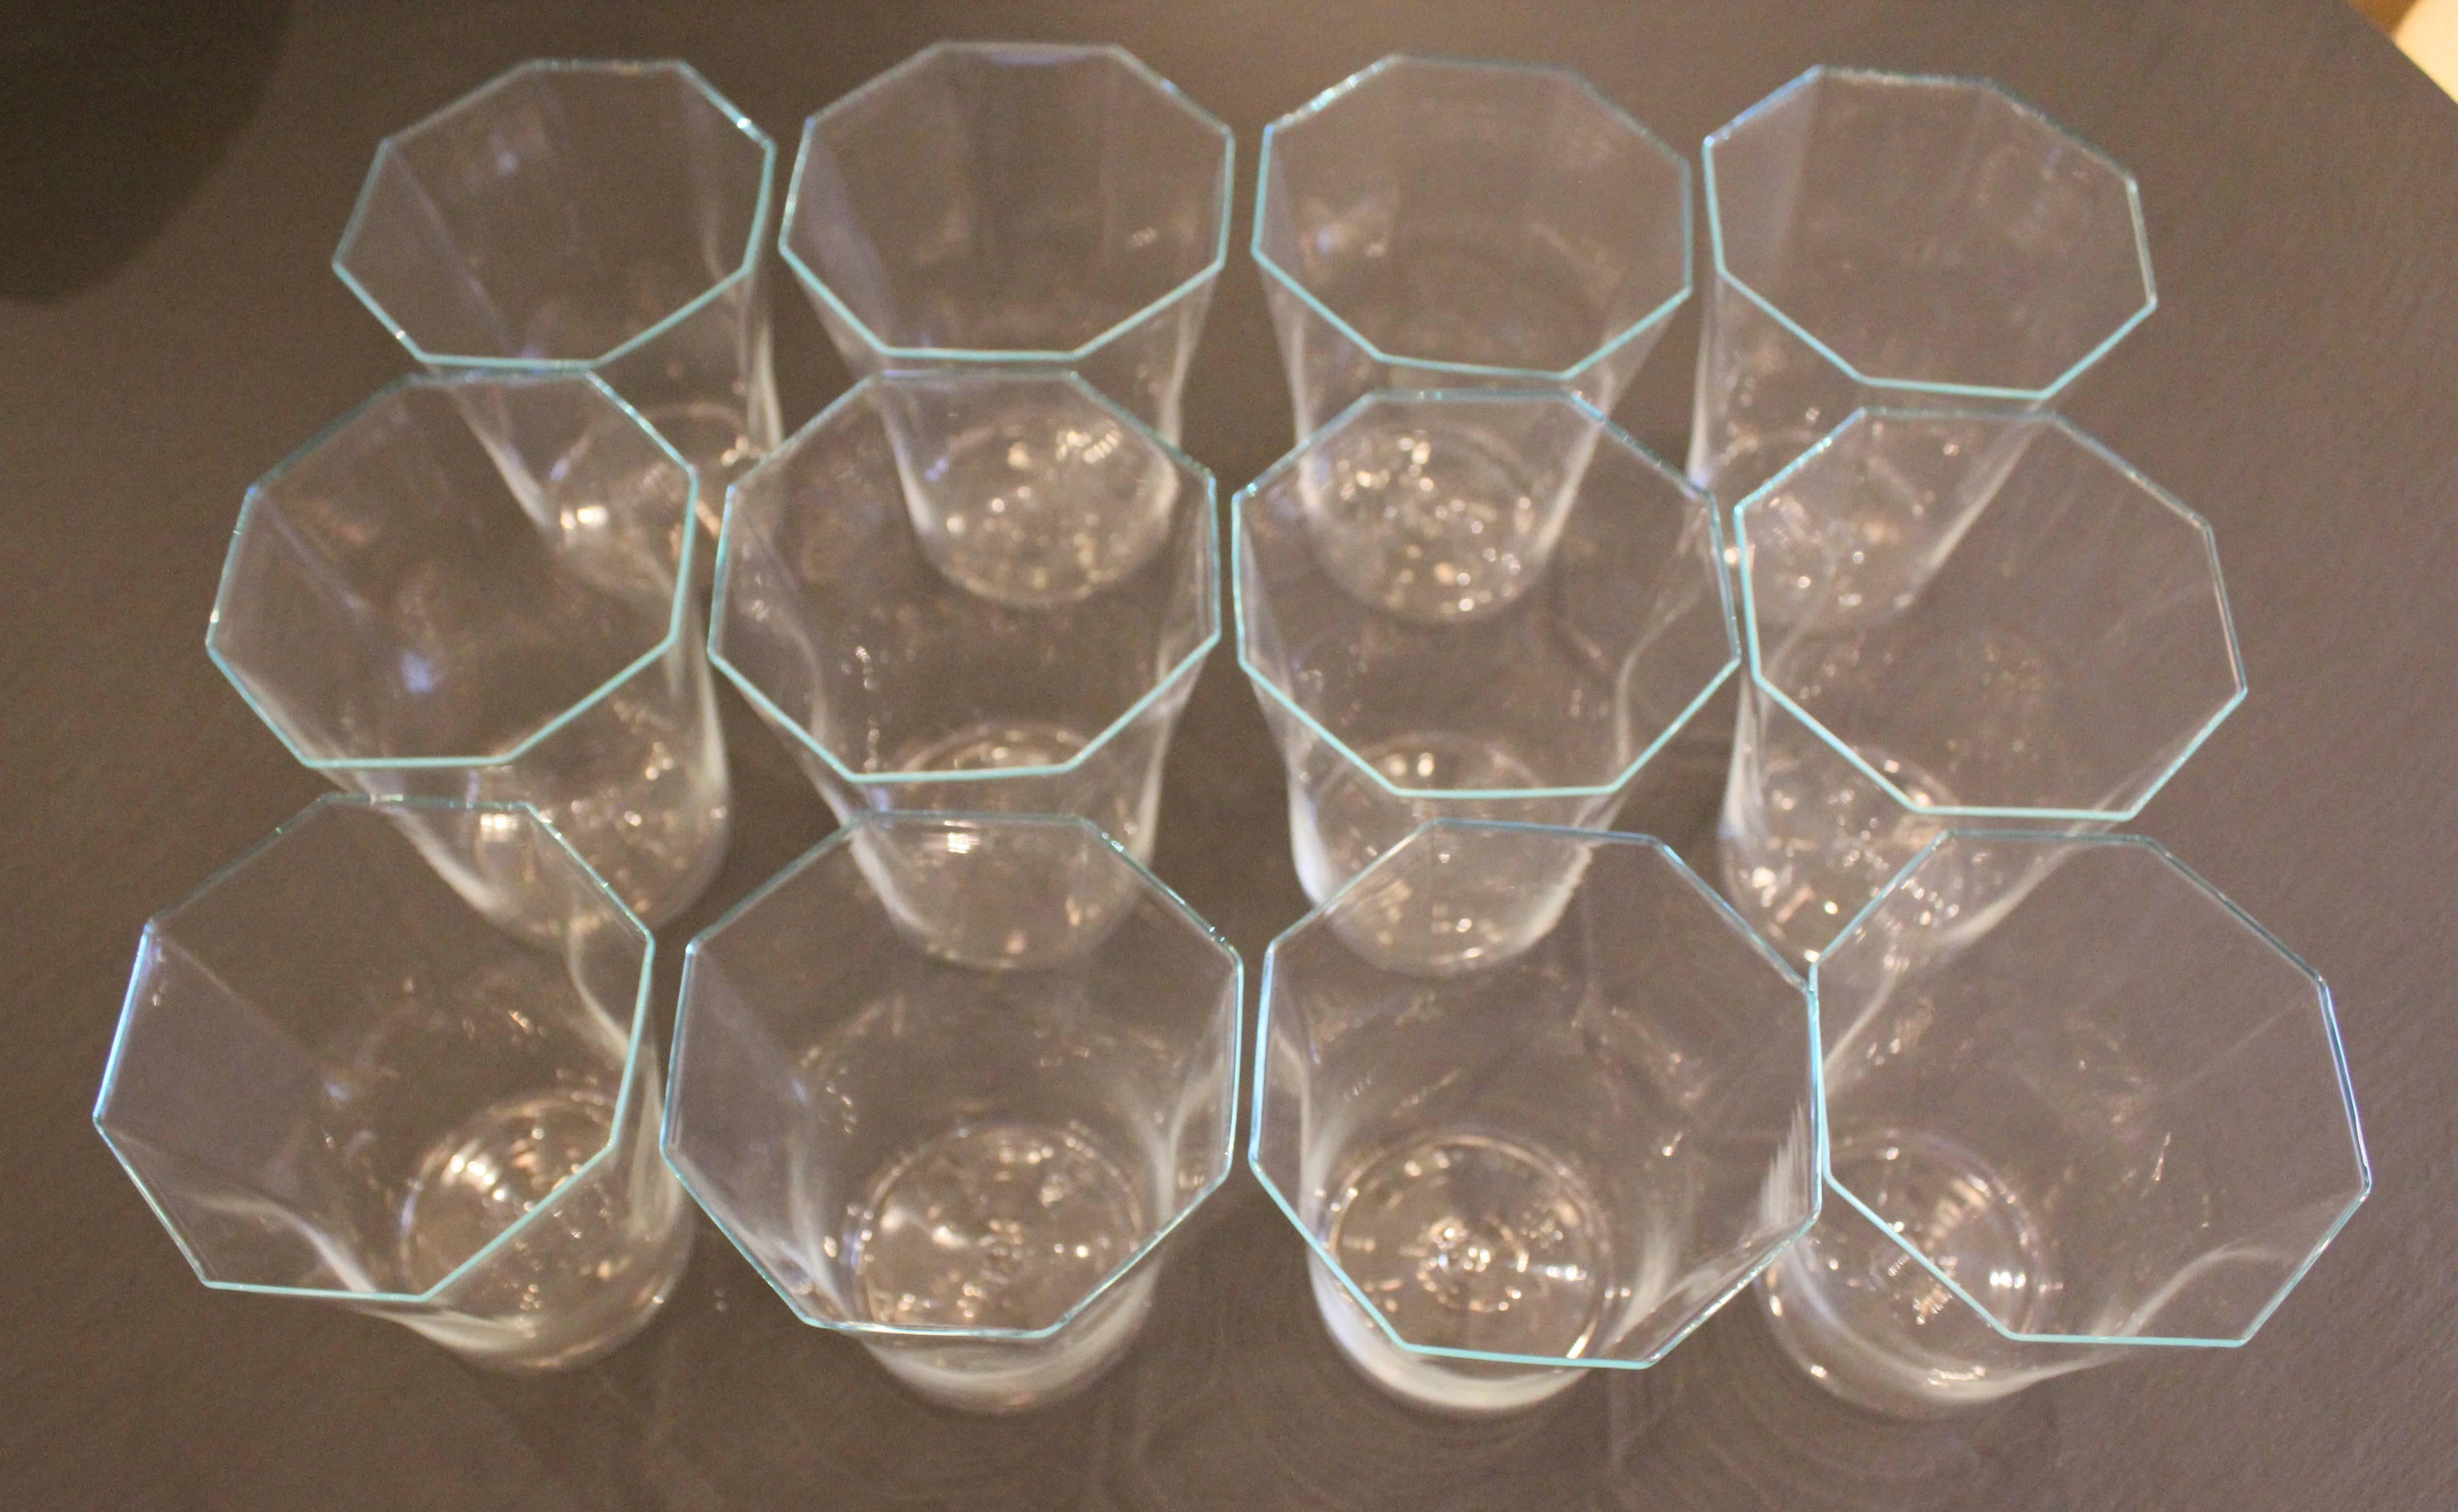 Italian Set of 12 Large Murano Glasses from the 1930s